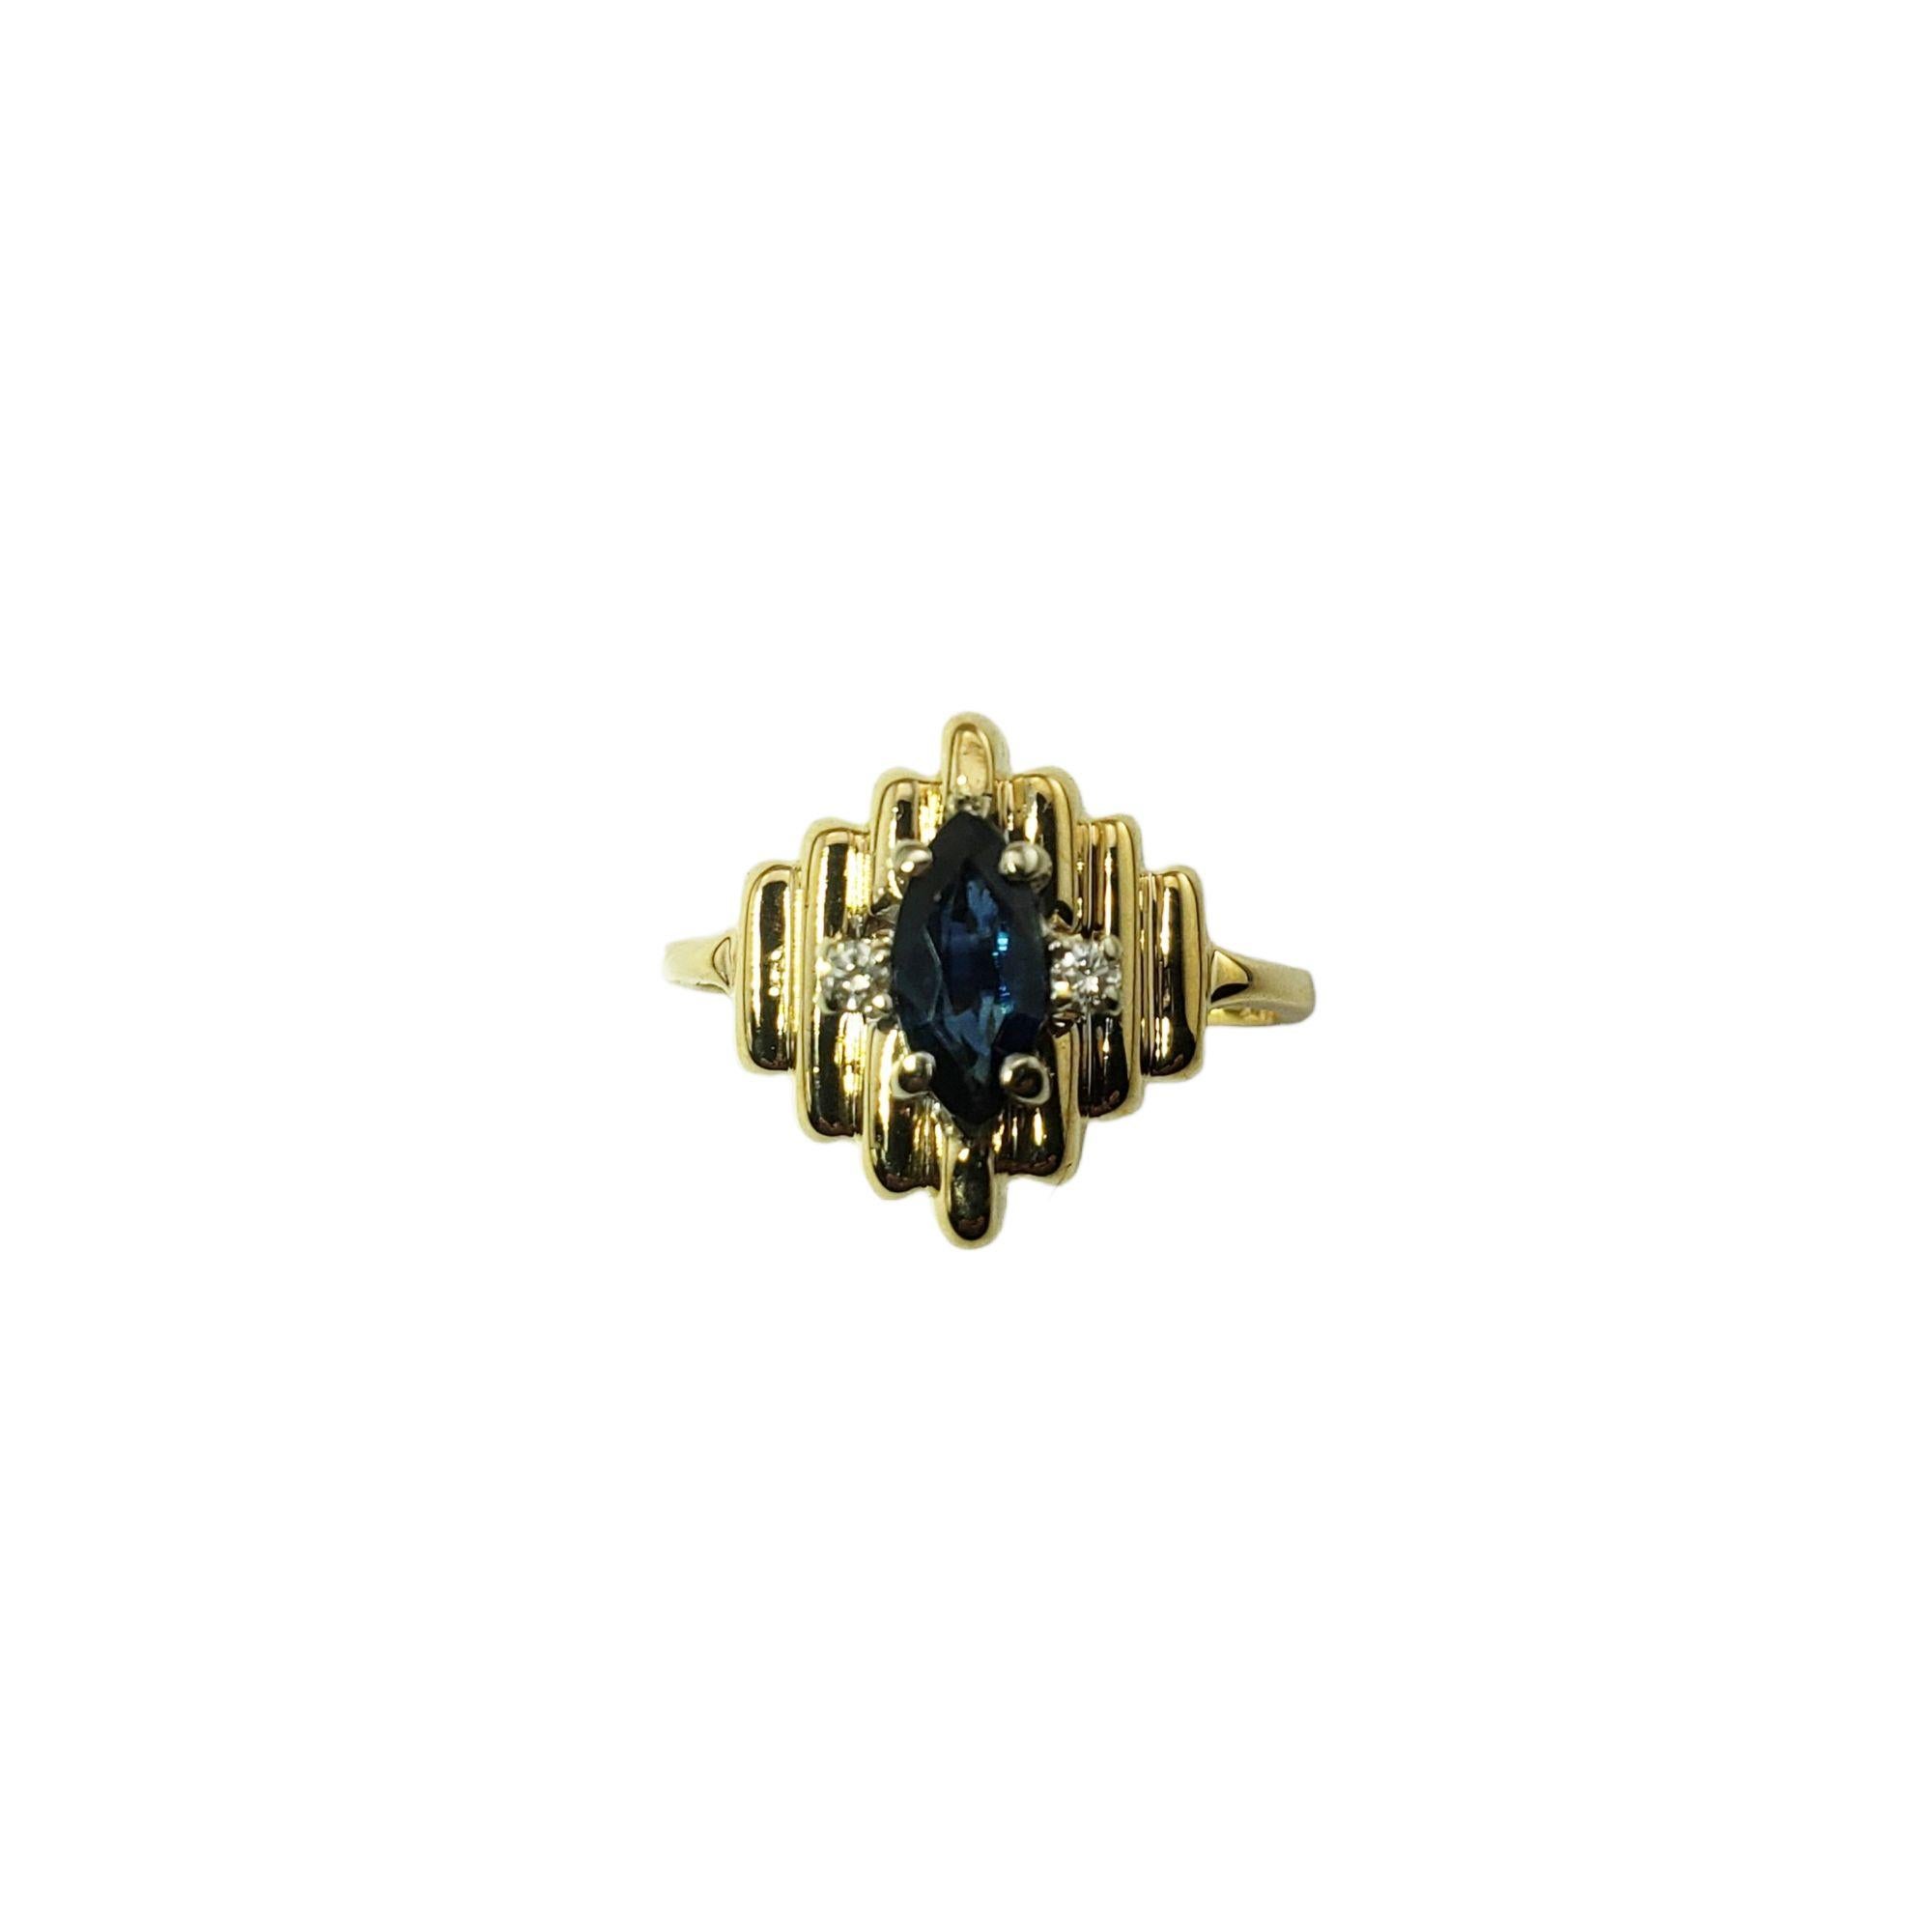 Vintage 14 Karat Yellow Gold Sapphire and Diamond Ring Size 6.5-

This lovely ring features one marquis sapphire (8 mm x 4 mm) and two round brilliant cut diamonds set in 14K yellow gold. Width: 14 mm.
Shank: 2 mm.

Approximate total diamond weight: